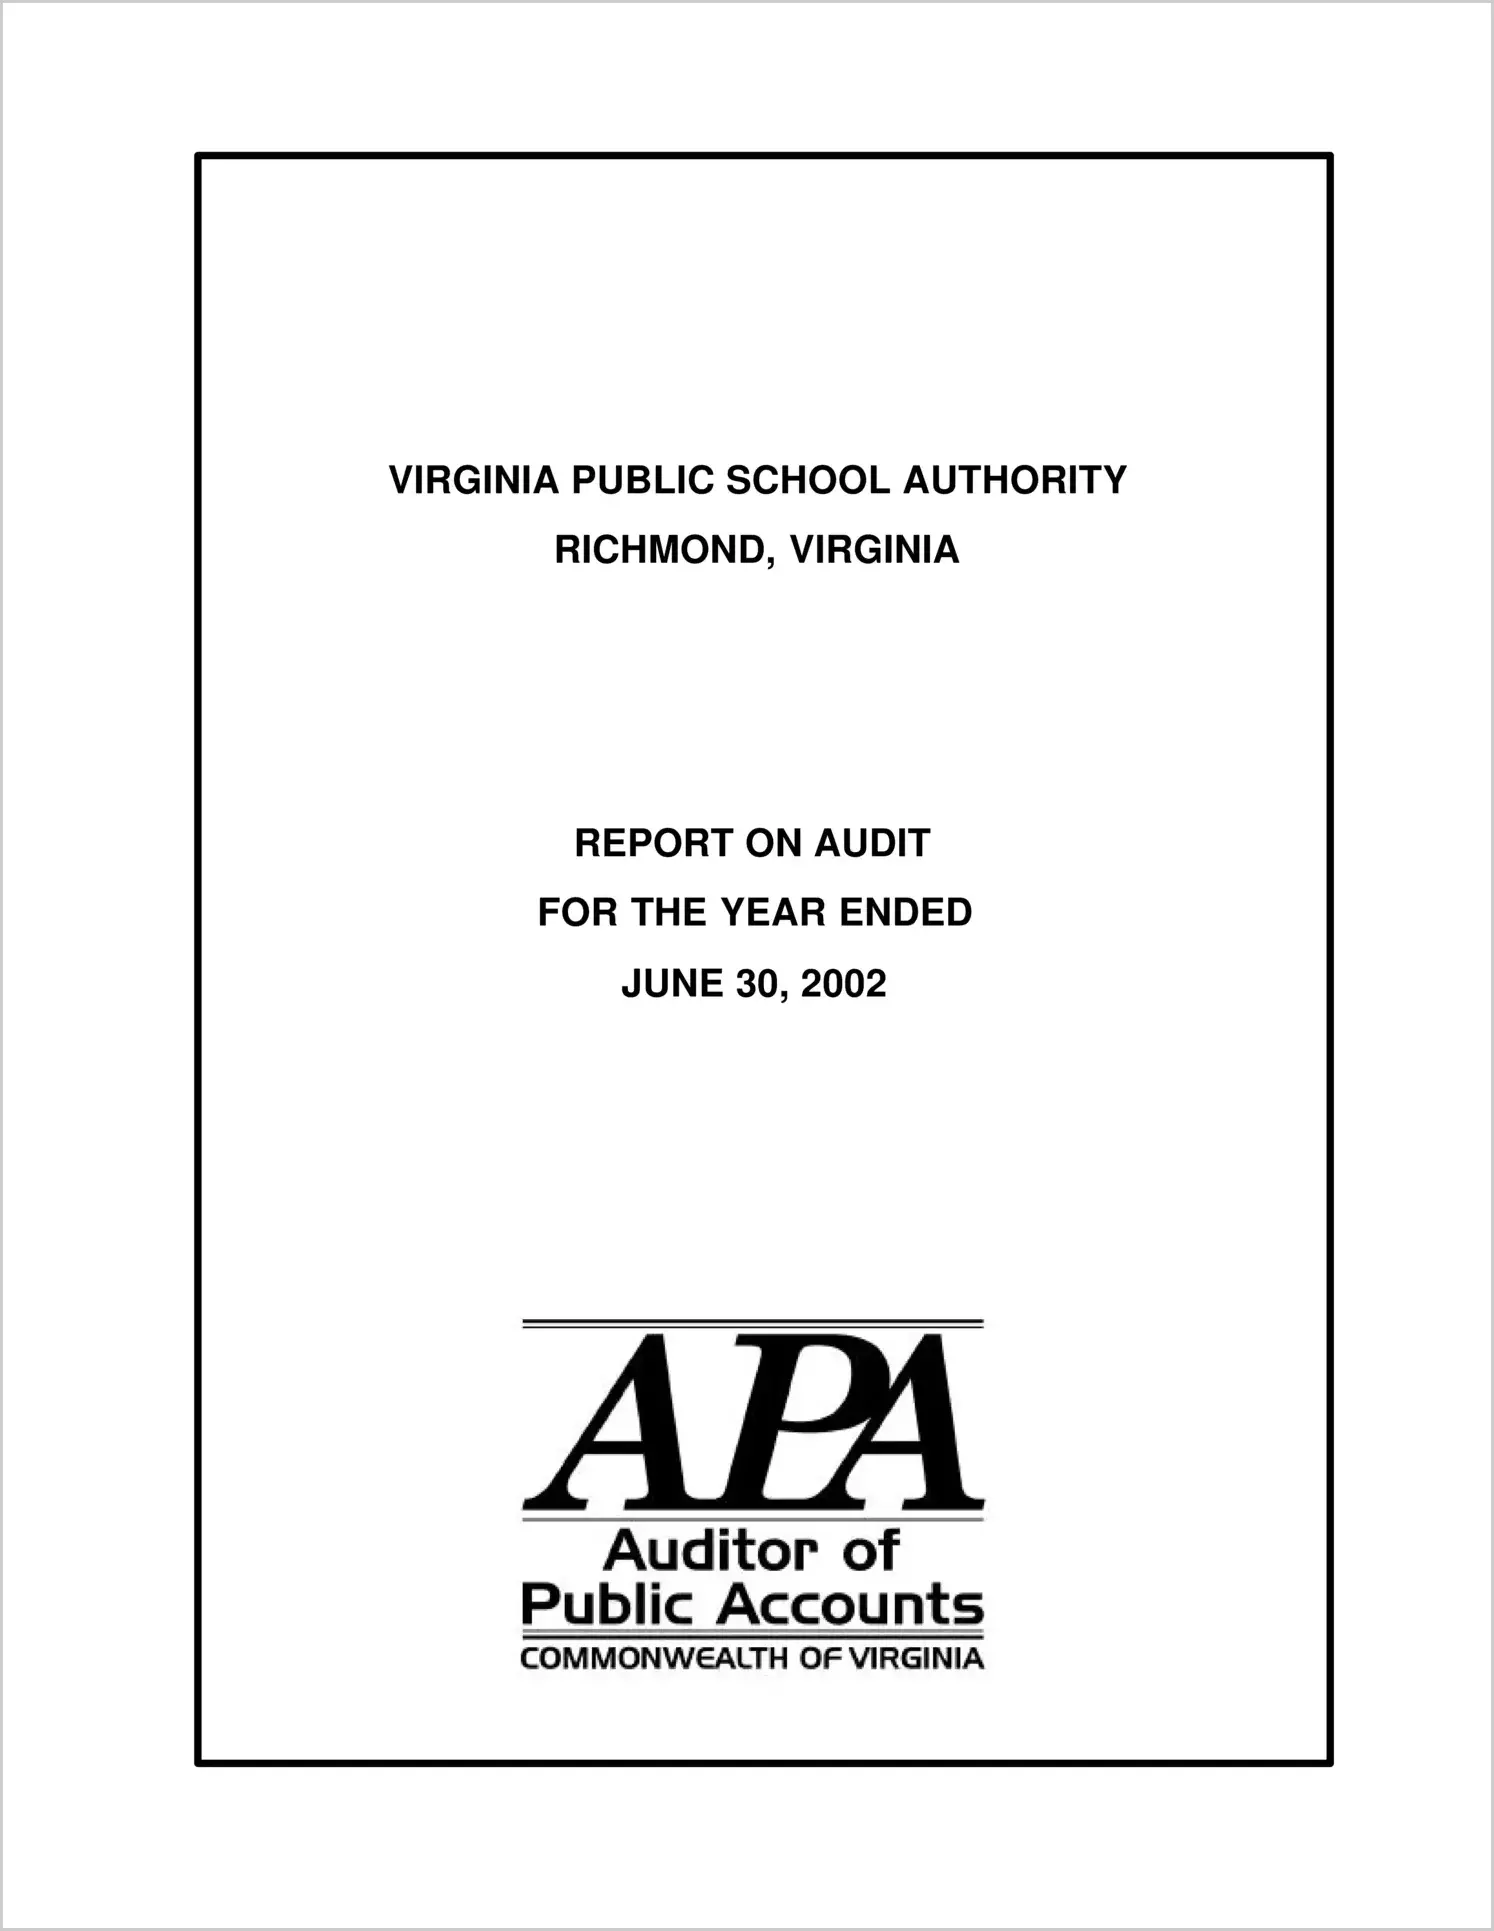 Virginia Public School Authority for the year ended June 30, 2002